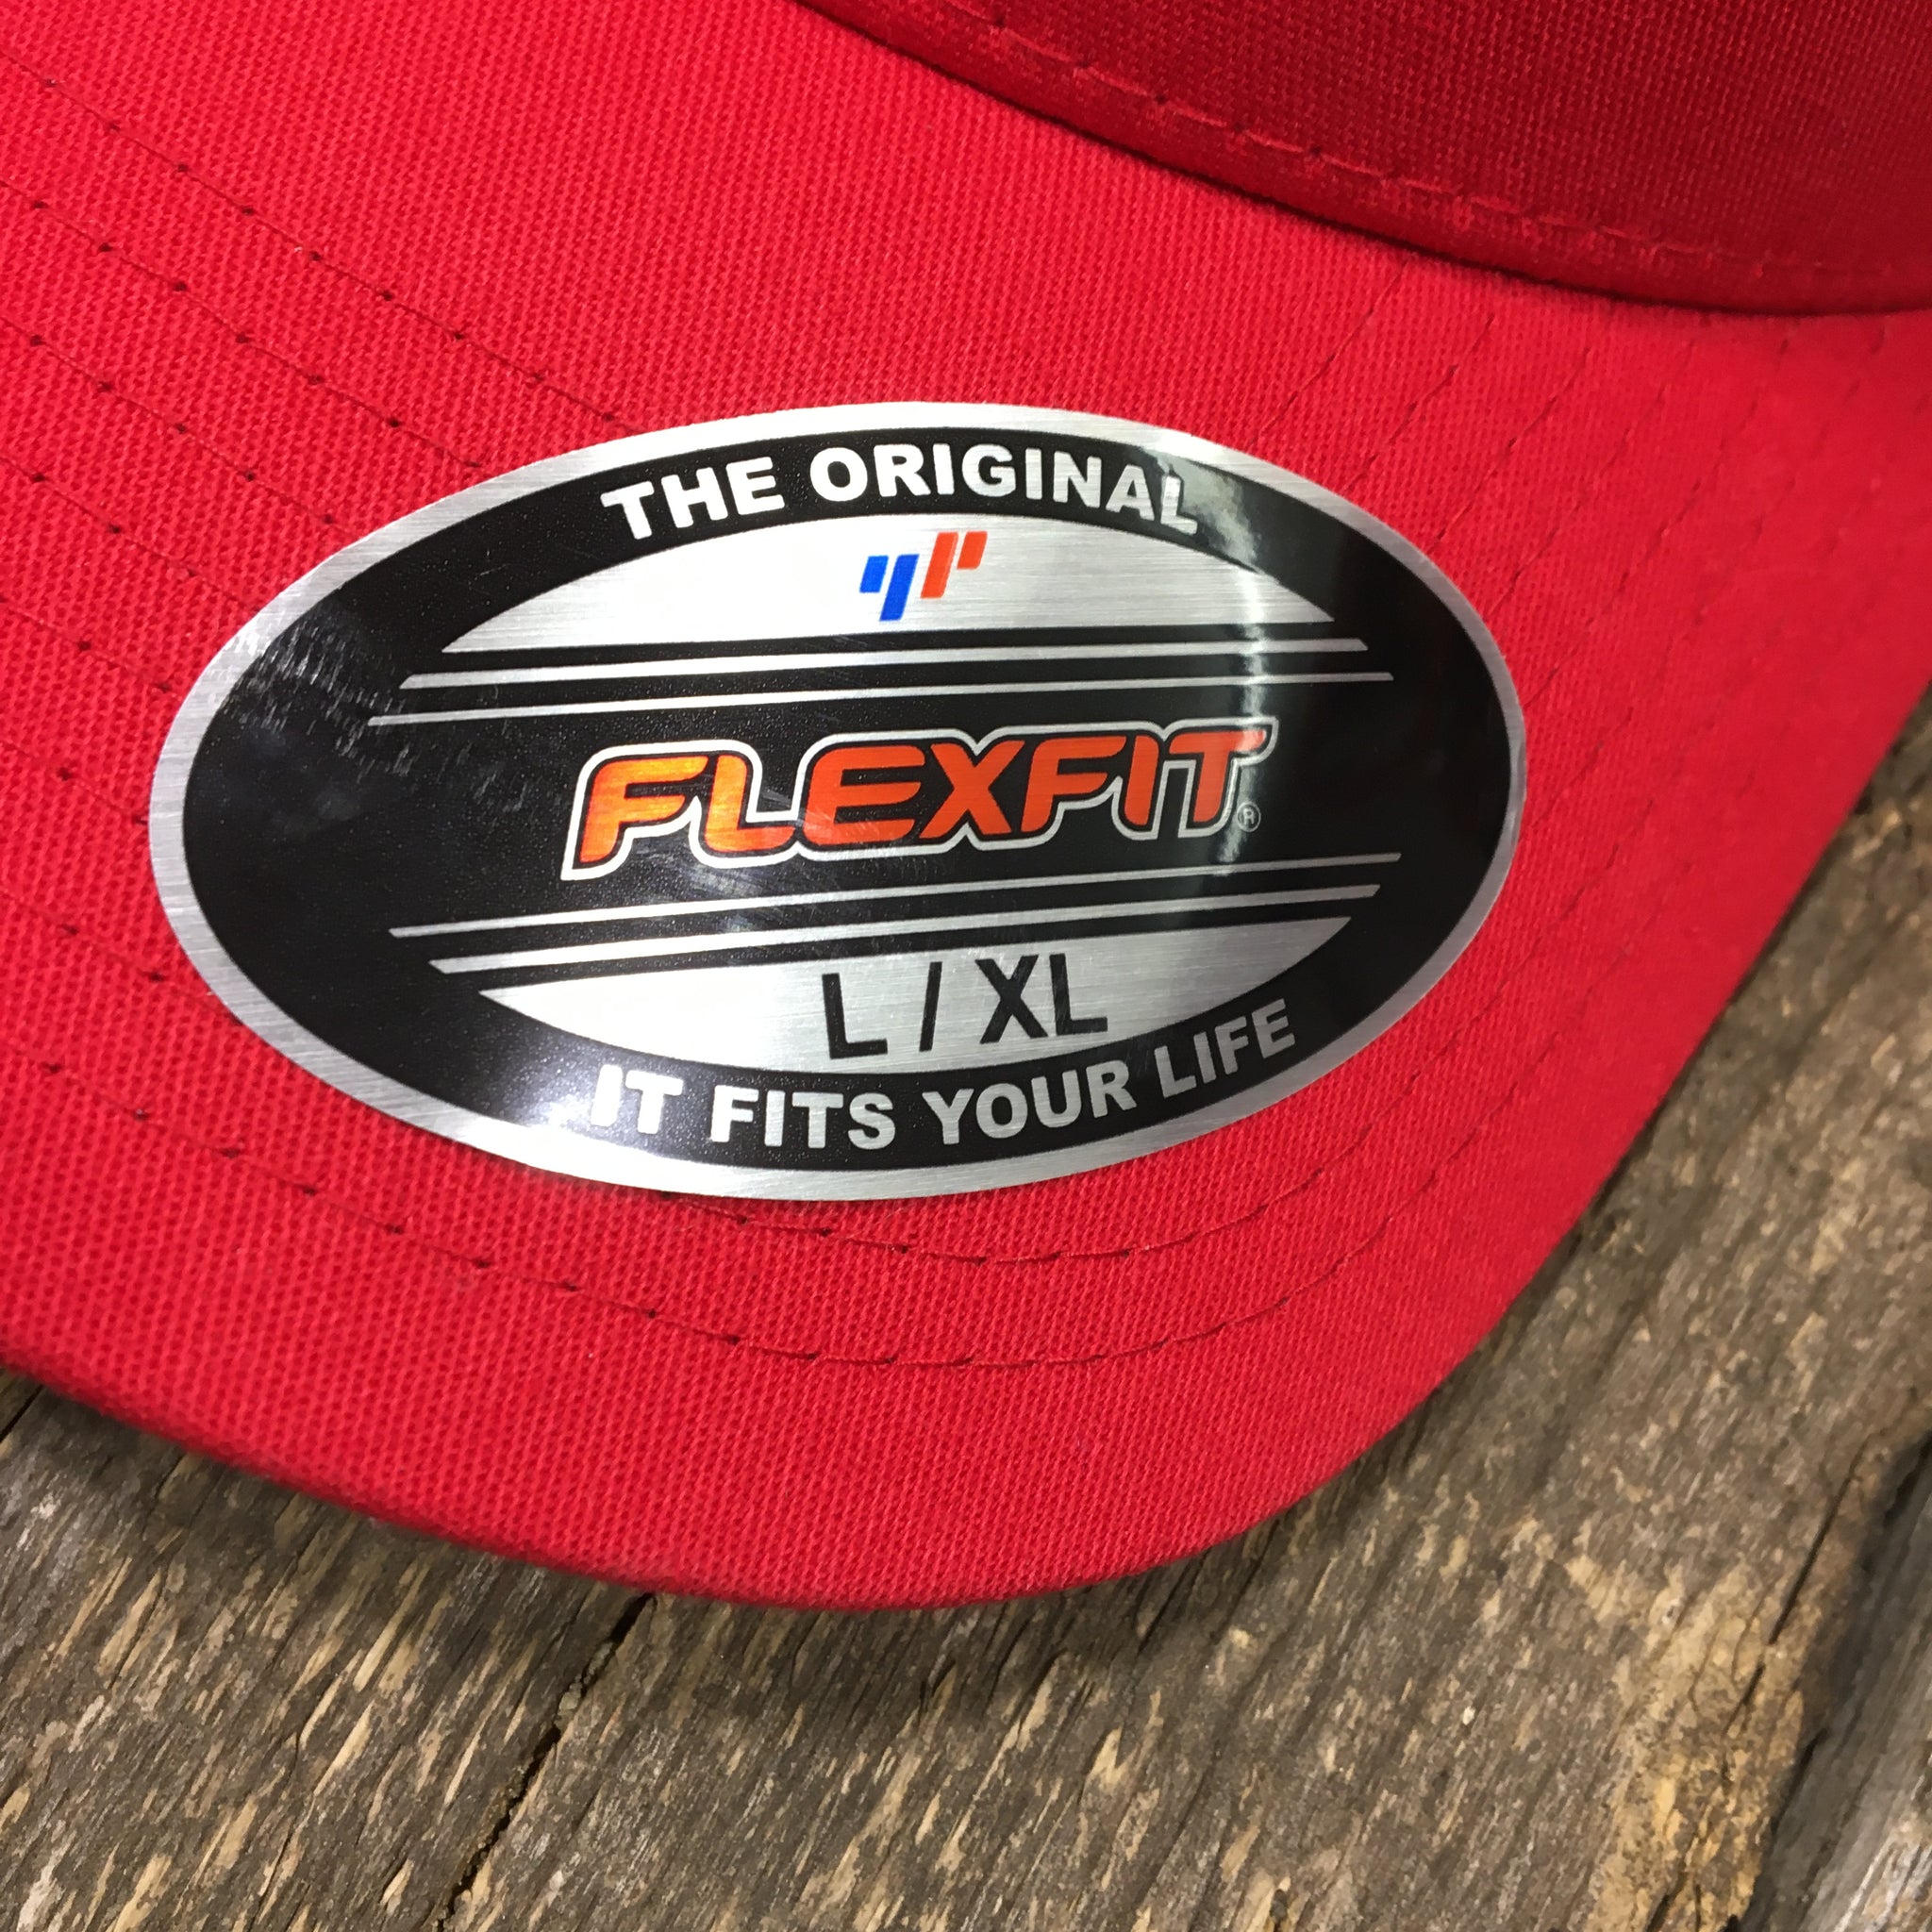 LIFT Innovations Curved-brim Flex-fit hat PRE-ORDER for May 2024 - Lift  Innovations